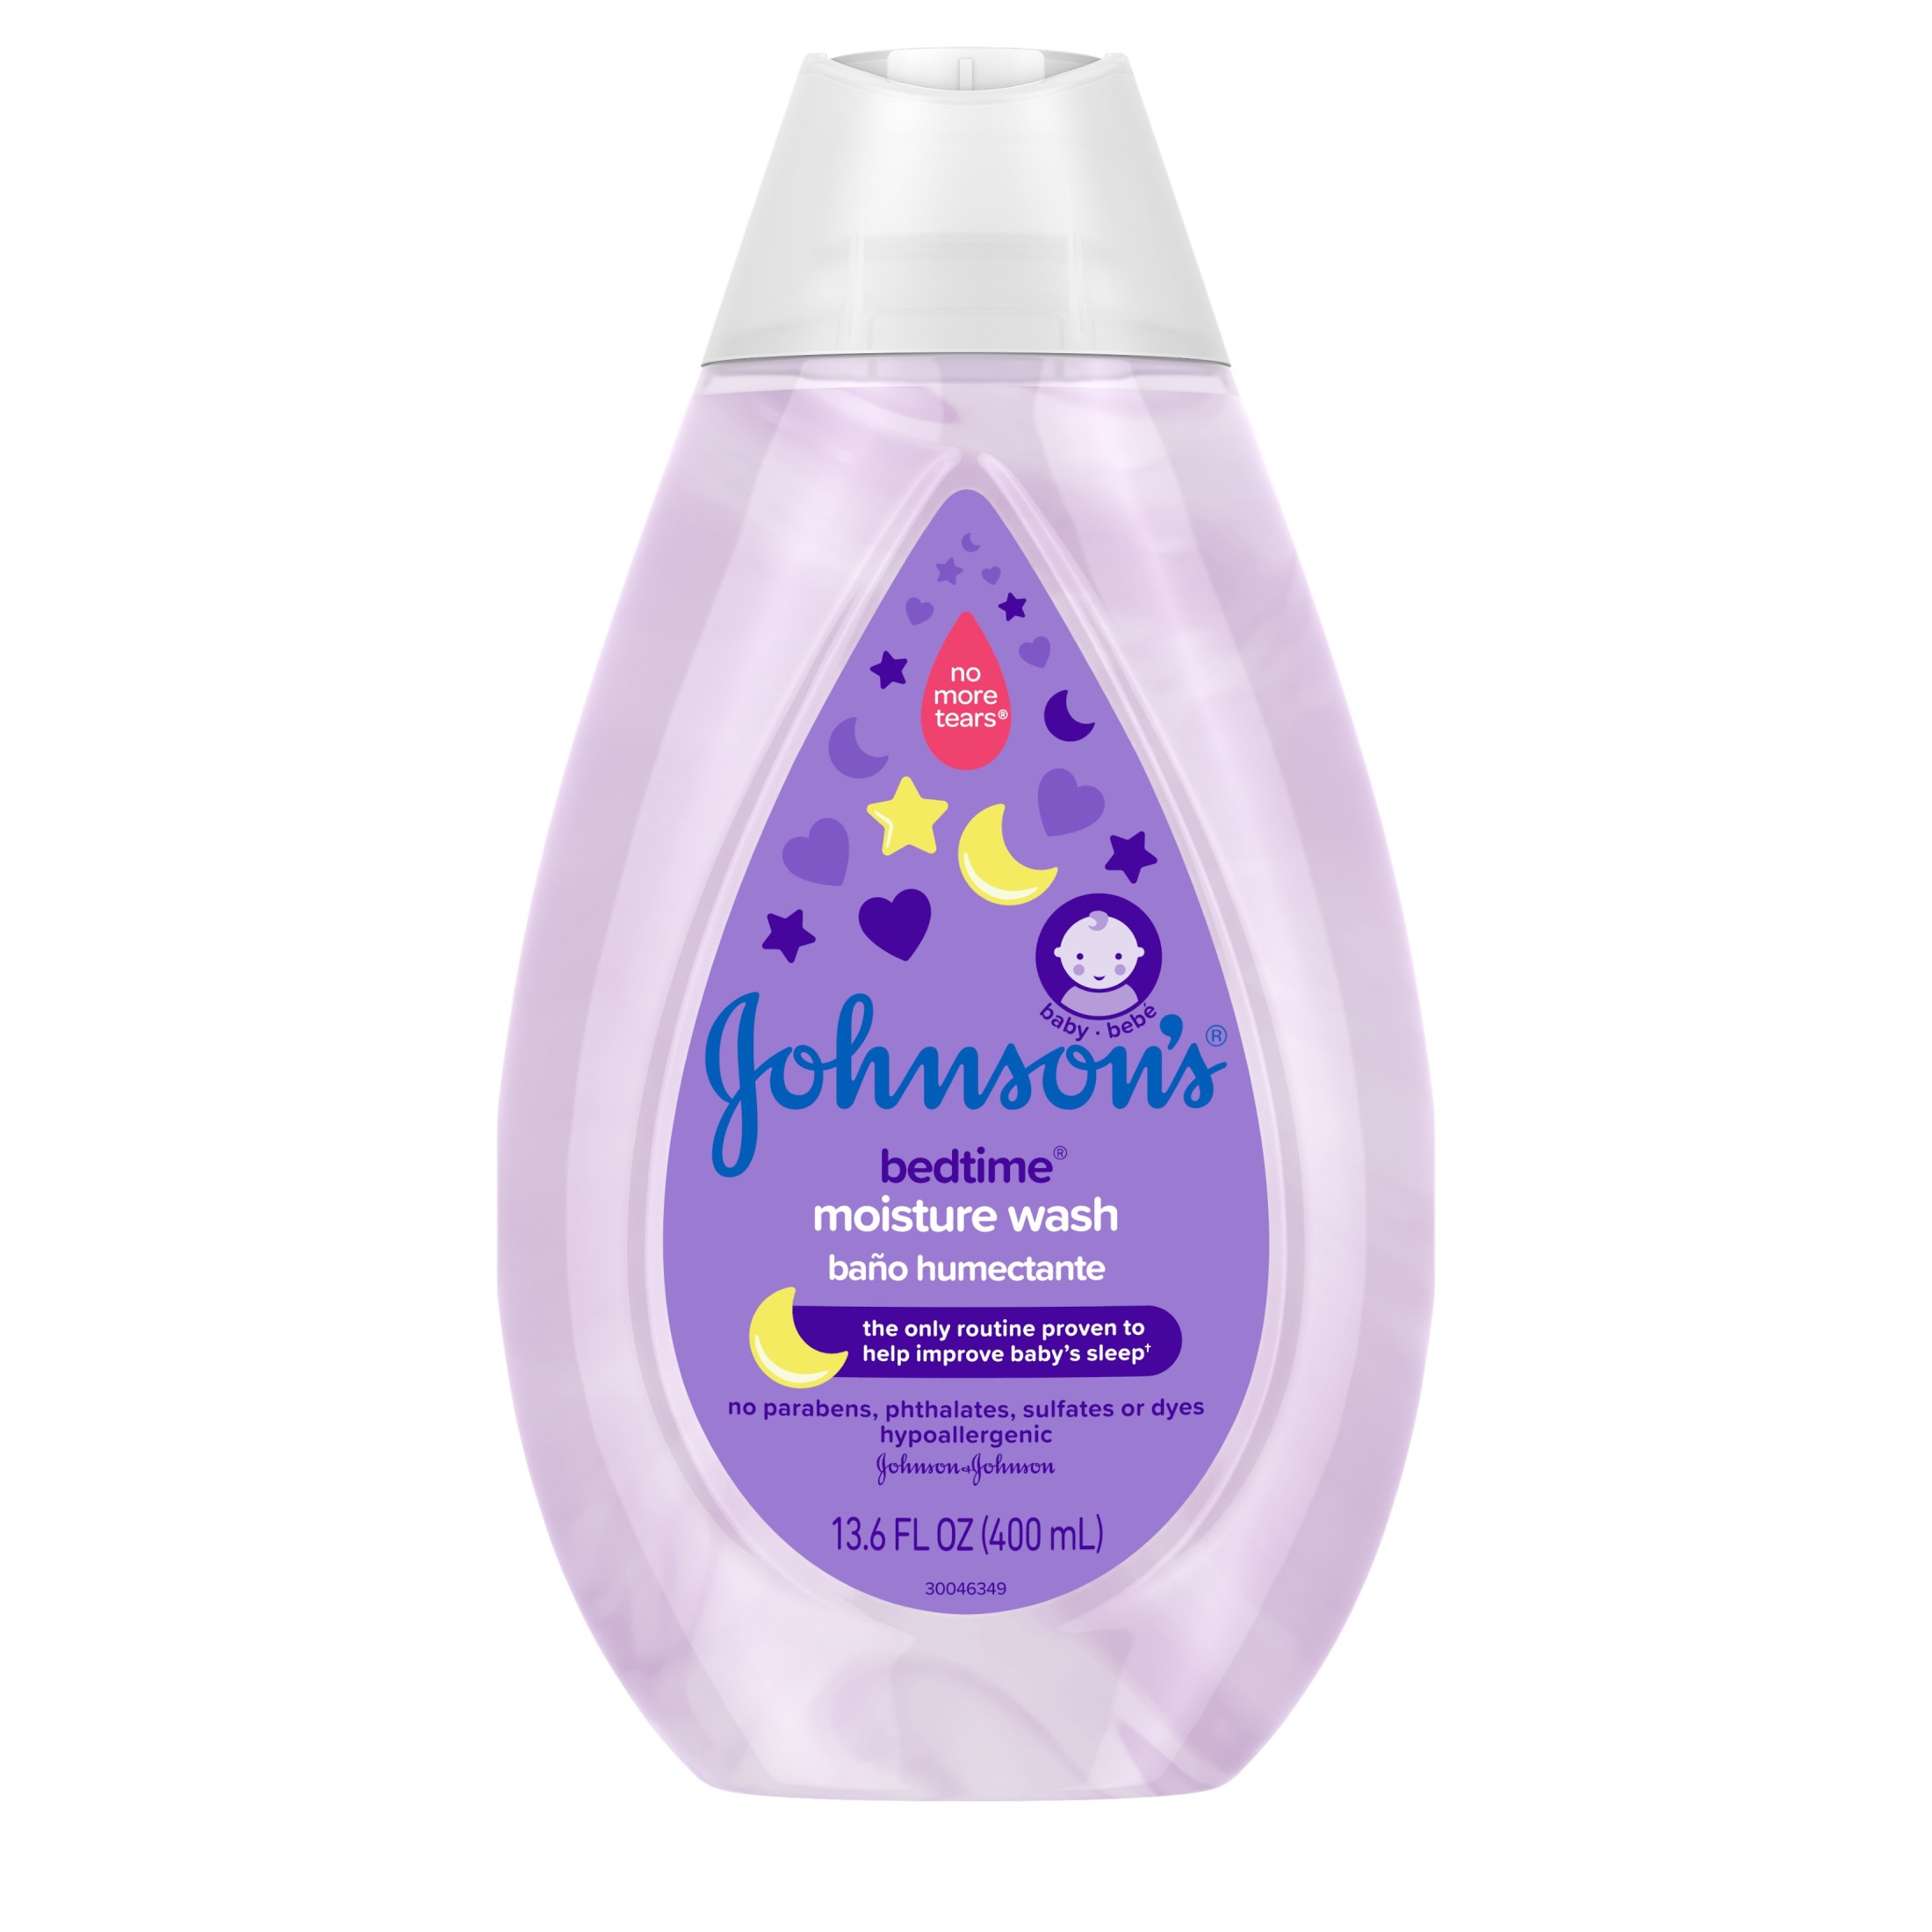 Johnson's Bedtime Tear-Free Baby Moisture Body Wash with Soothing Aromas, 13.6 oz - image 3 of 10